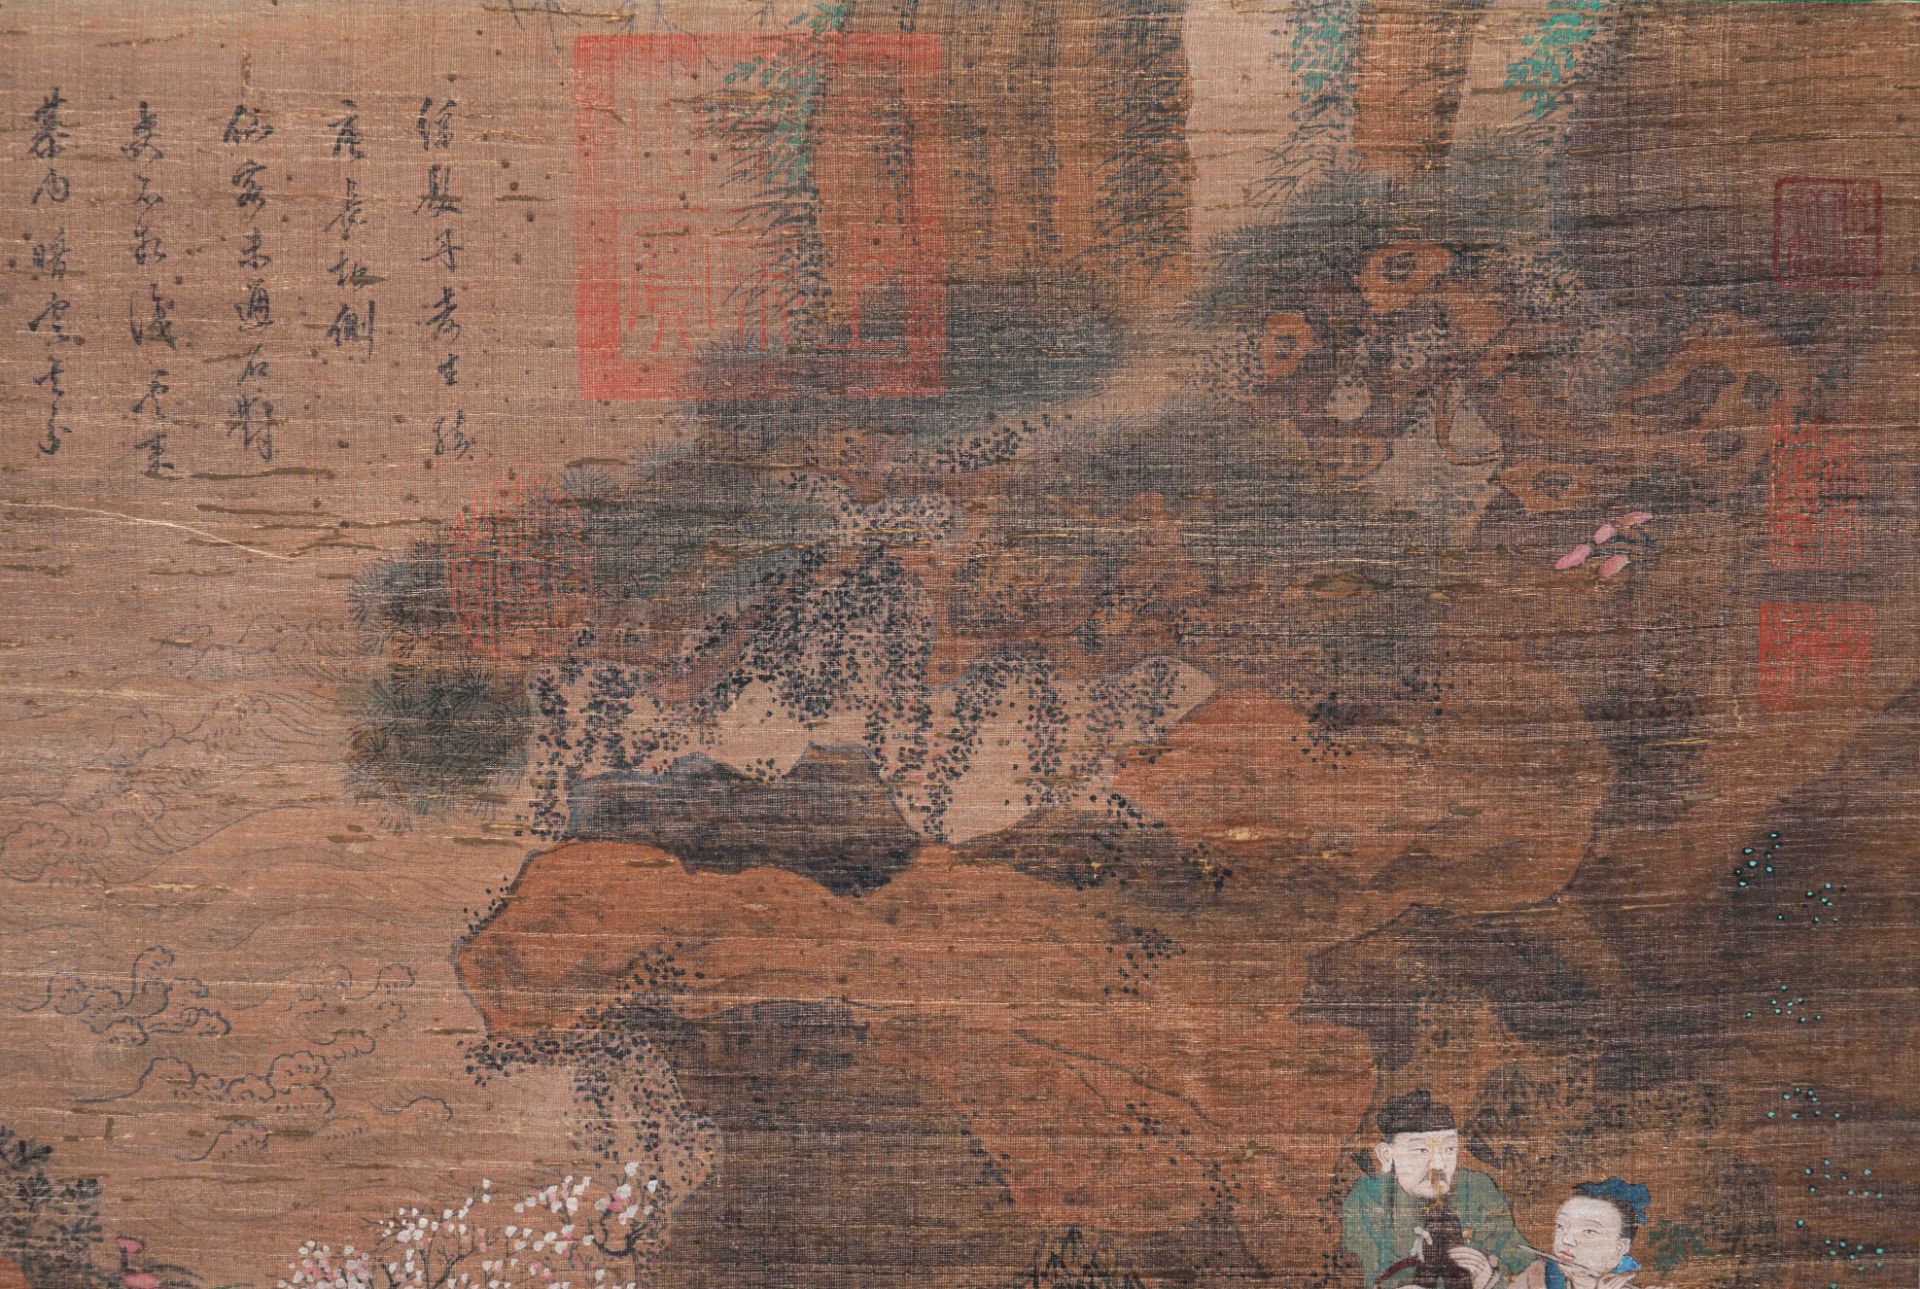 A Chinese Scroll Painting By Zhan Ziyu - Image 5 of 9